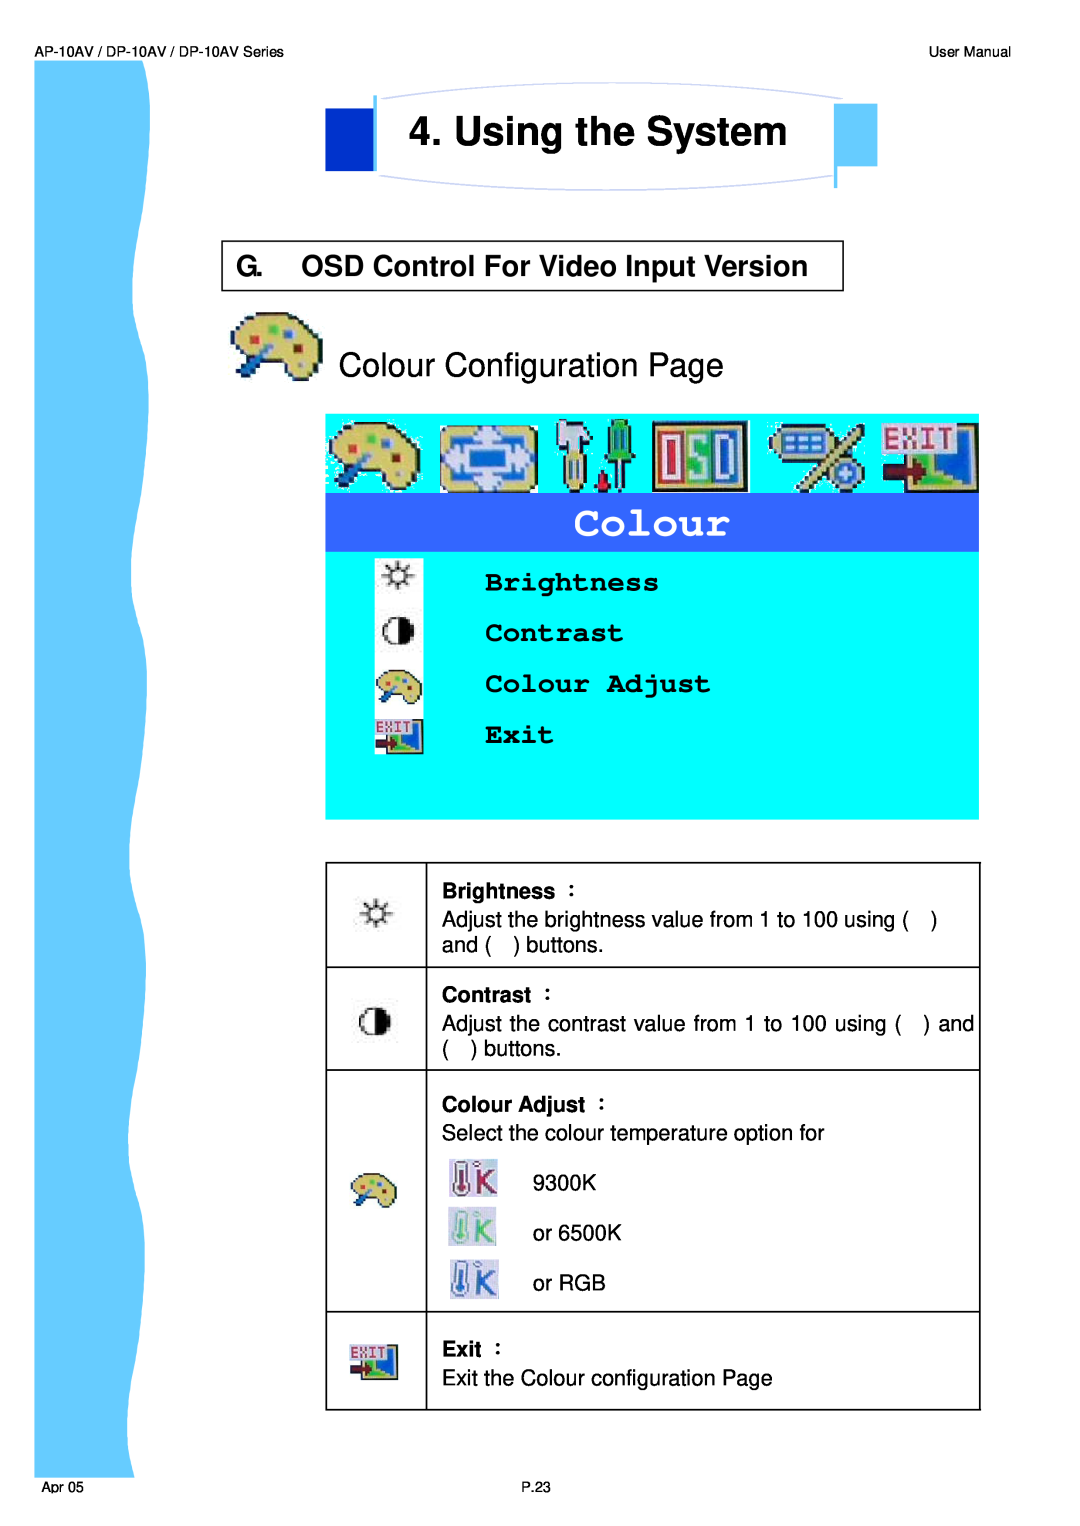 3M UMUV.10-045V2 Colour Configuration Page, G. OSD Control For Video Input Version, Using the System, Brightness ︰ 